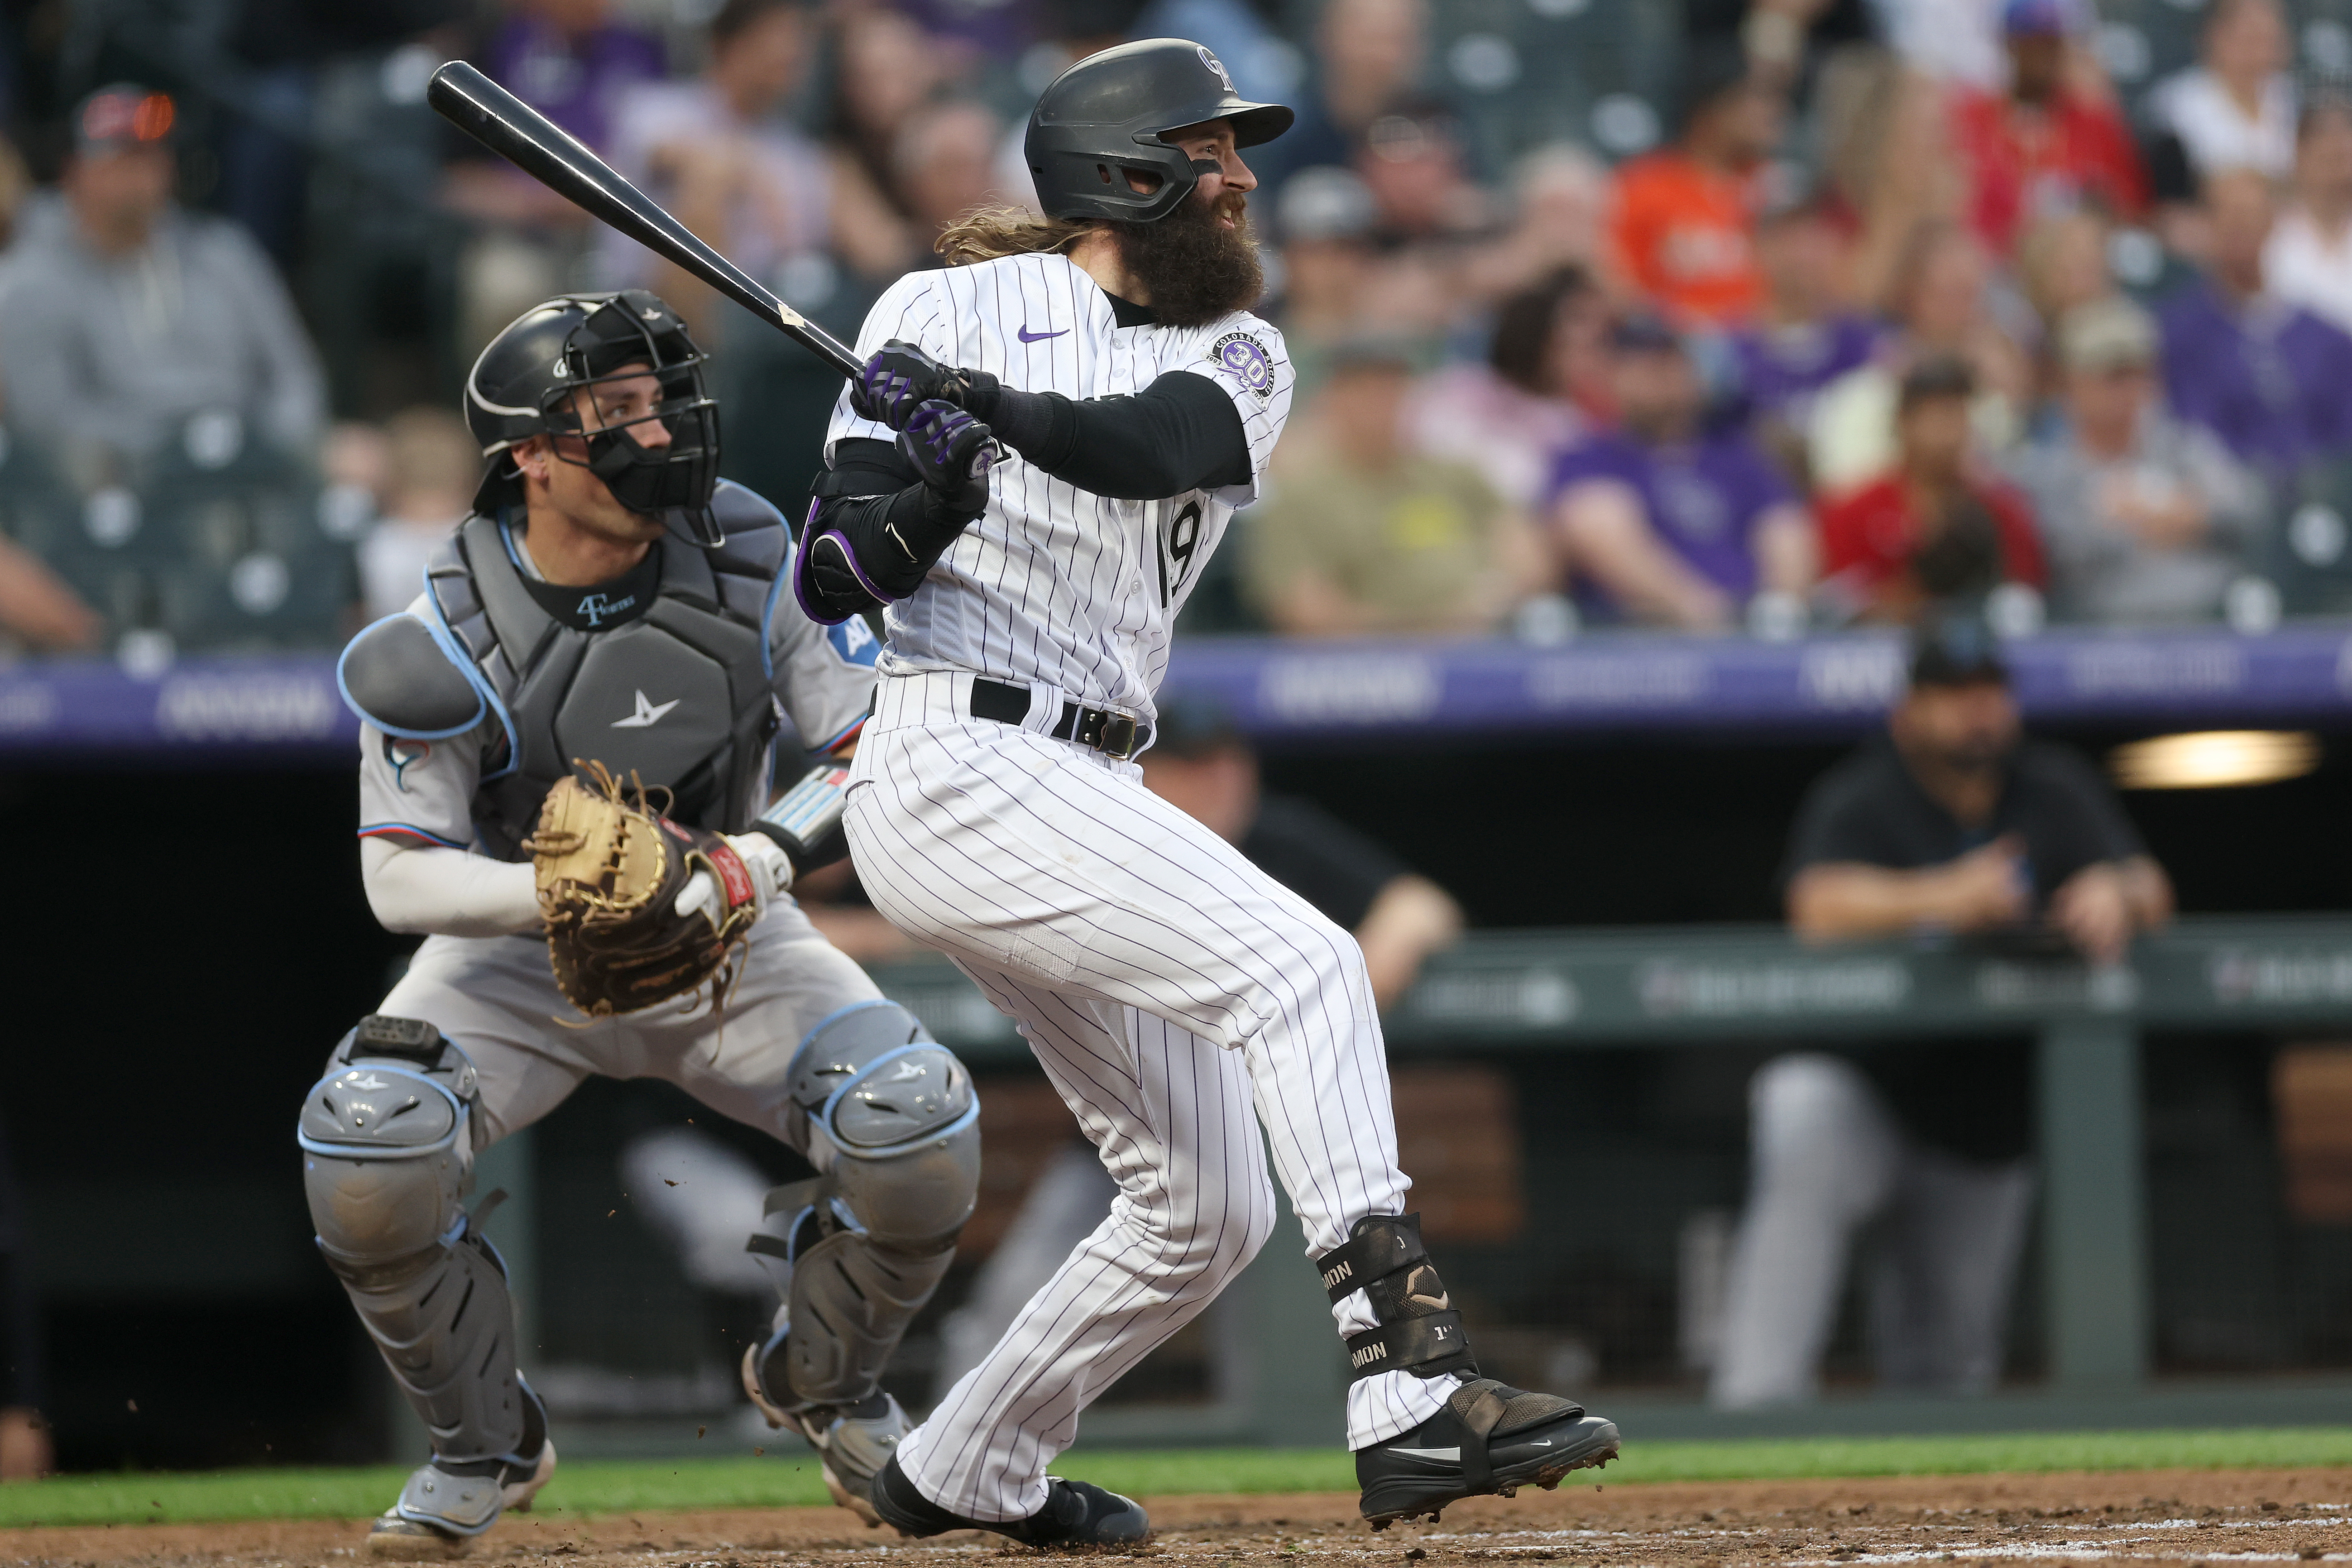 Grichuk's go-ahead RBI single in the ninth rallies Rockies past